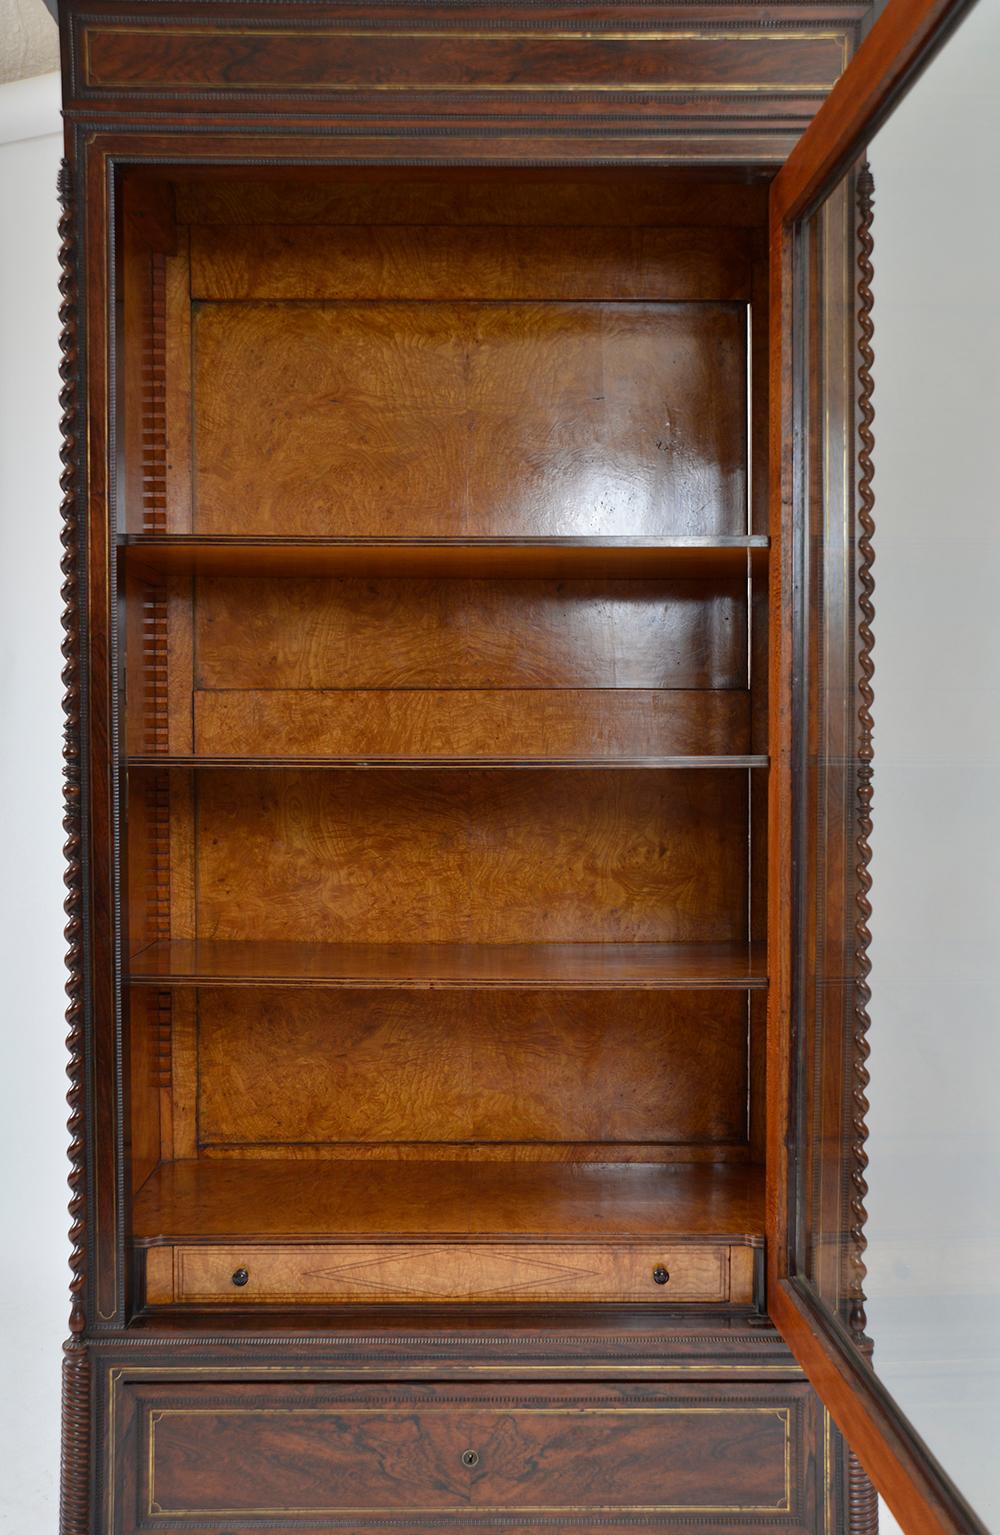 19th Century Louis XVI Style French Vitrine Display Cabinet Bookcase Rosewood In Good Condition For Sale In Sherborne, Dorset